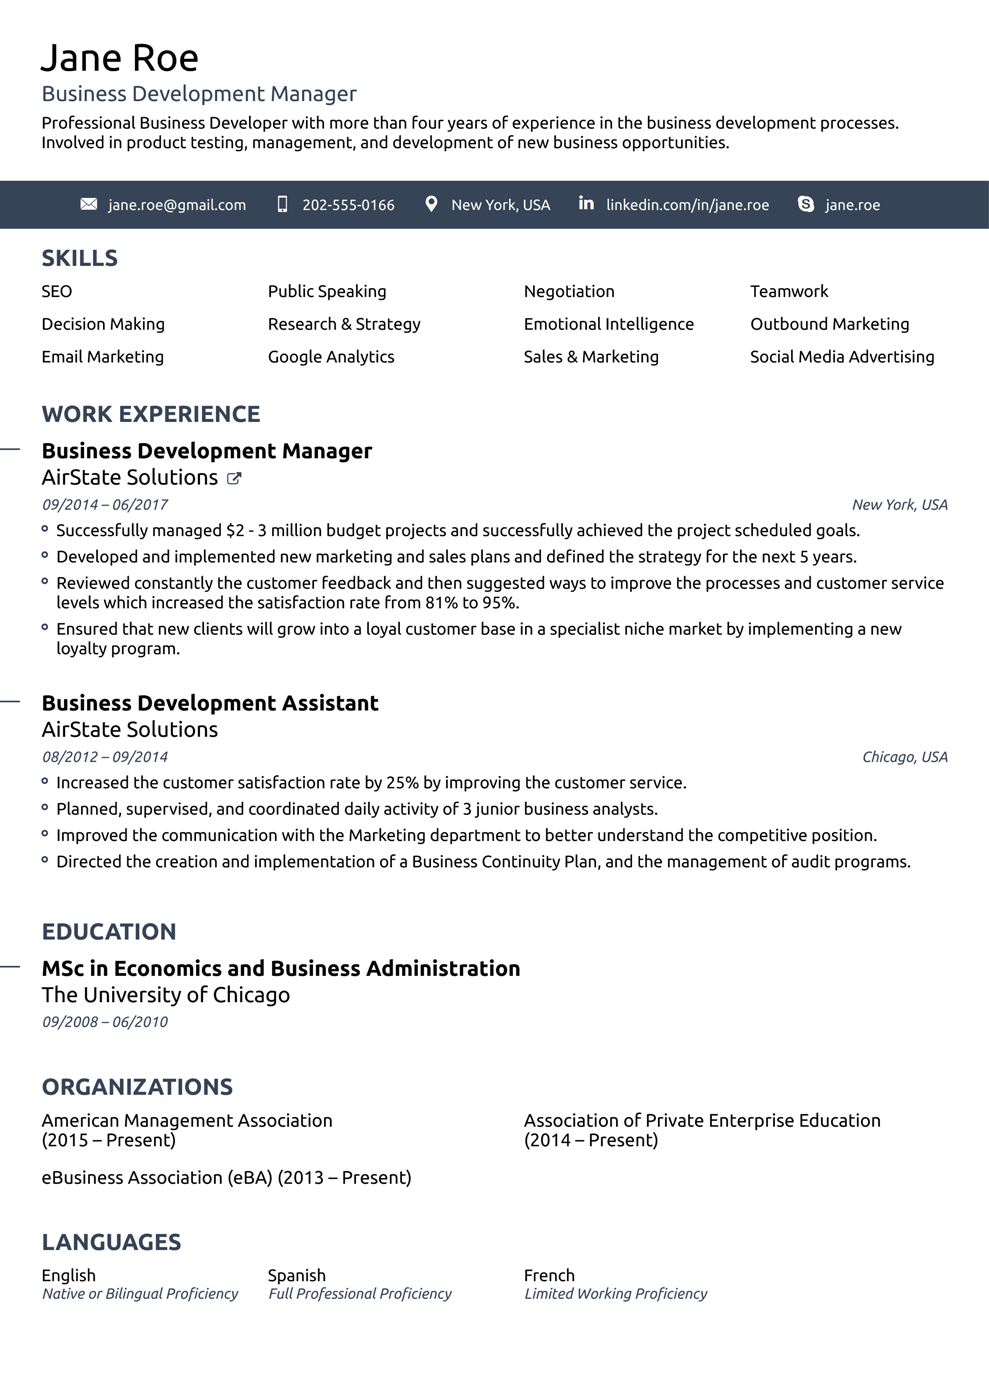 Creating A Resume Simple Resume Template creating a resume|wikiresume.com